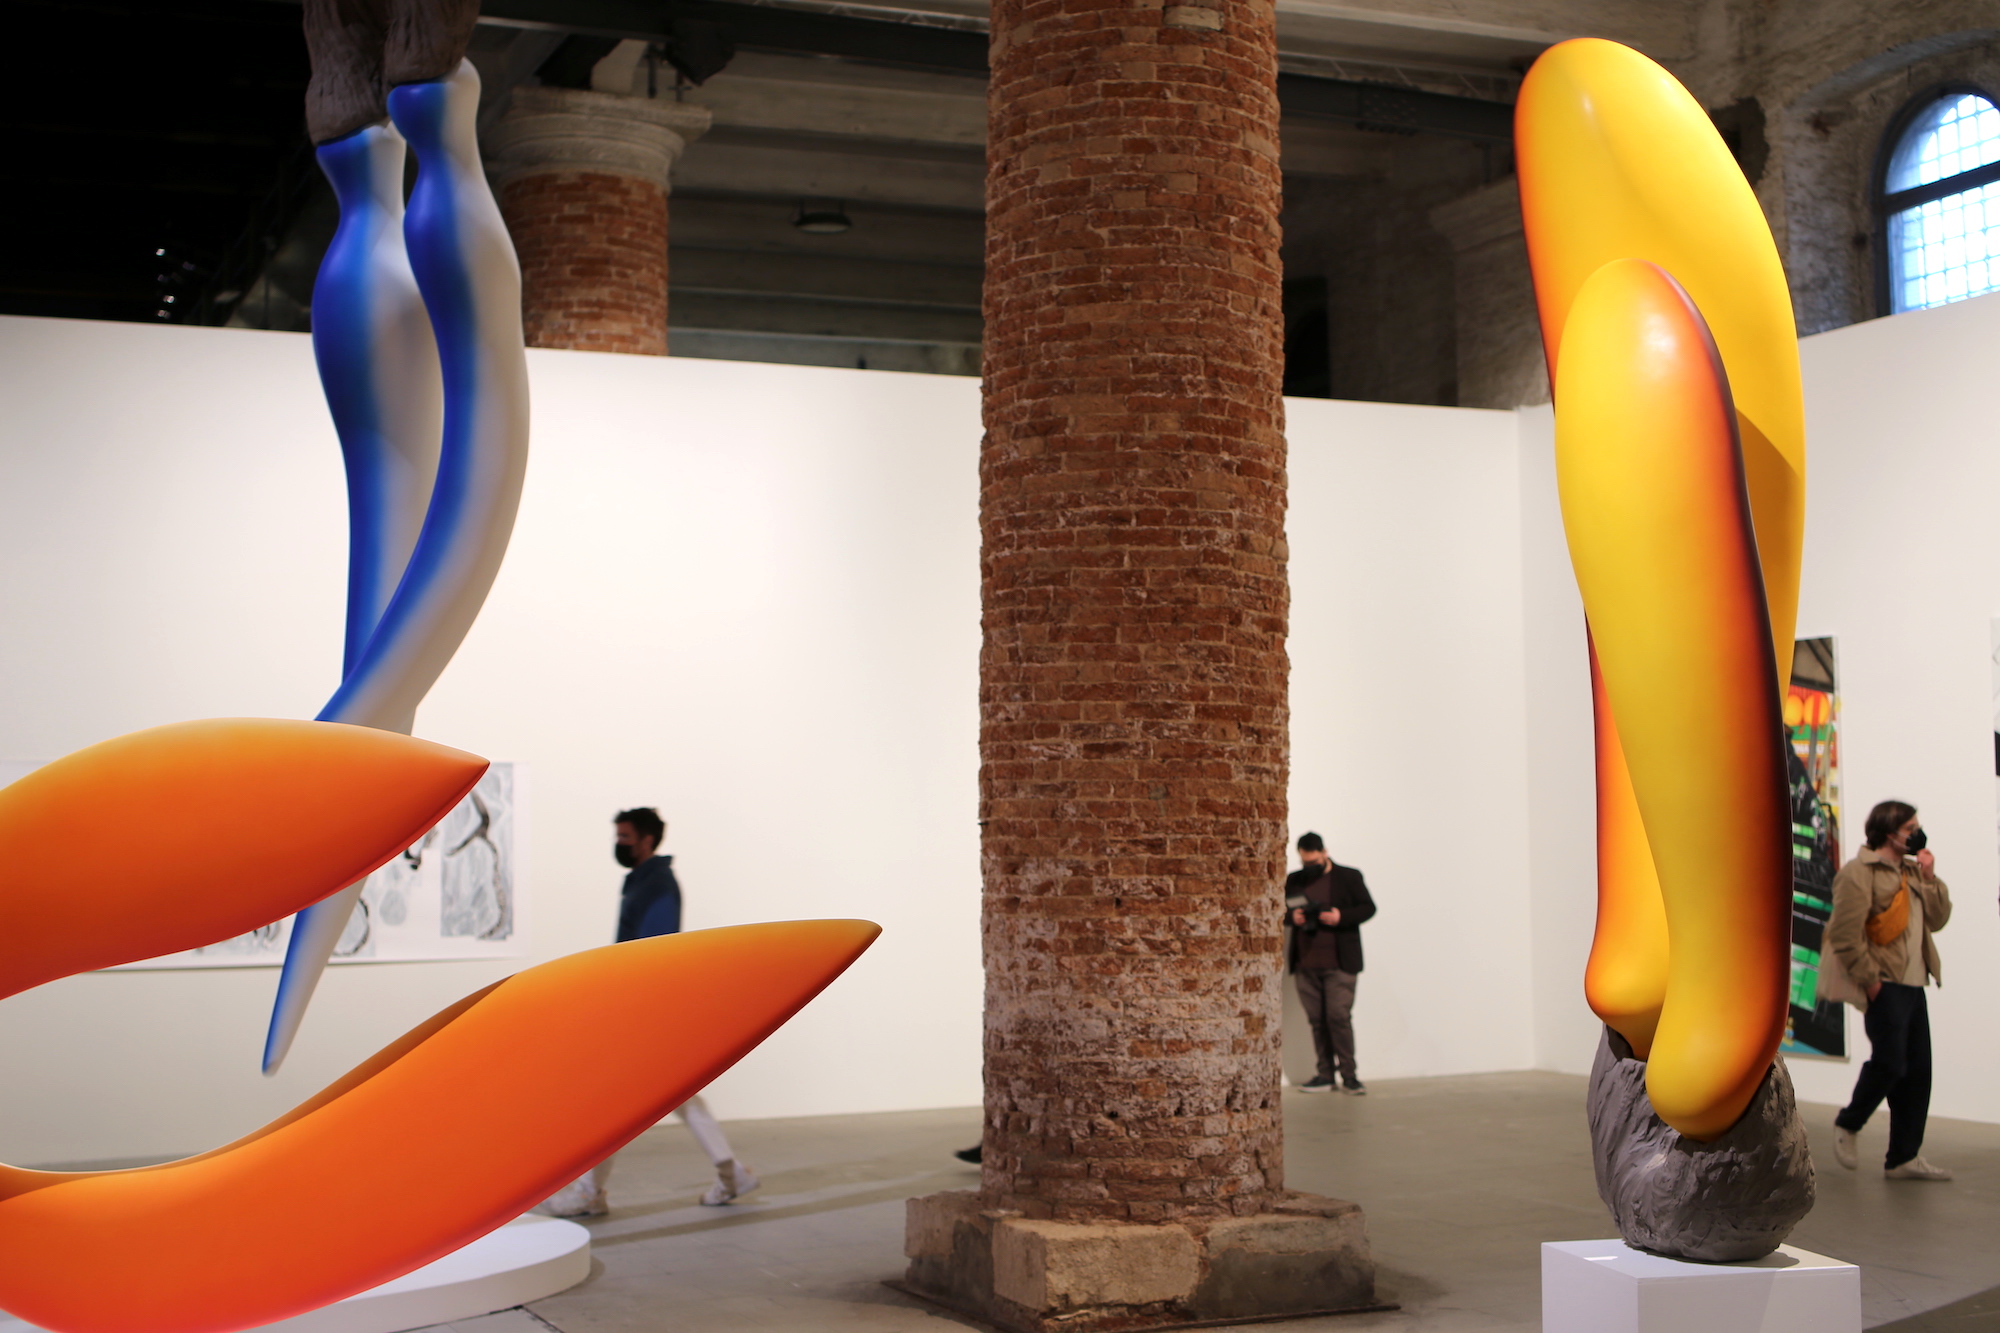 Teresa Solar, Tunnel Boring Machine (2022) at the Arsenale Central Exhibition. Photo by Louise Benson